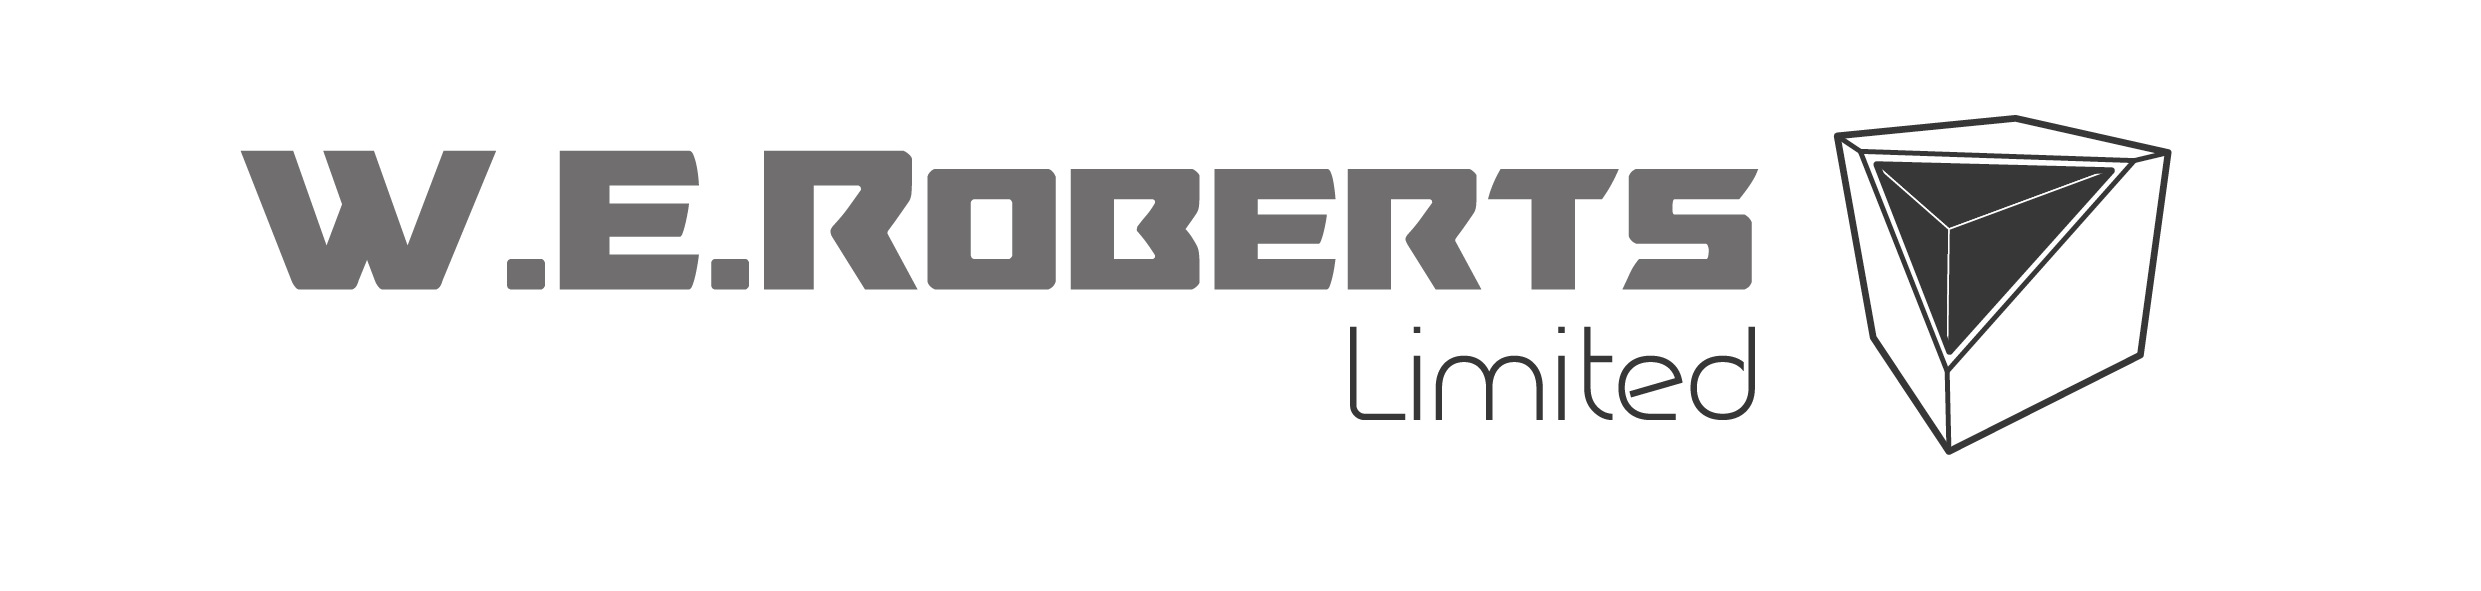 logo for W.E Roberts Limited